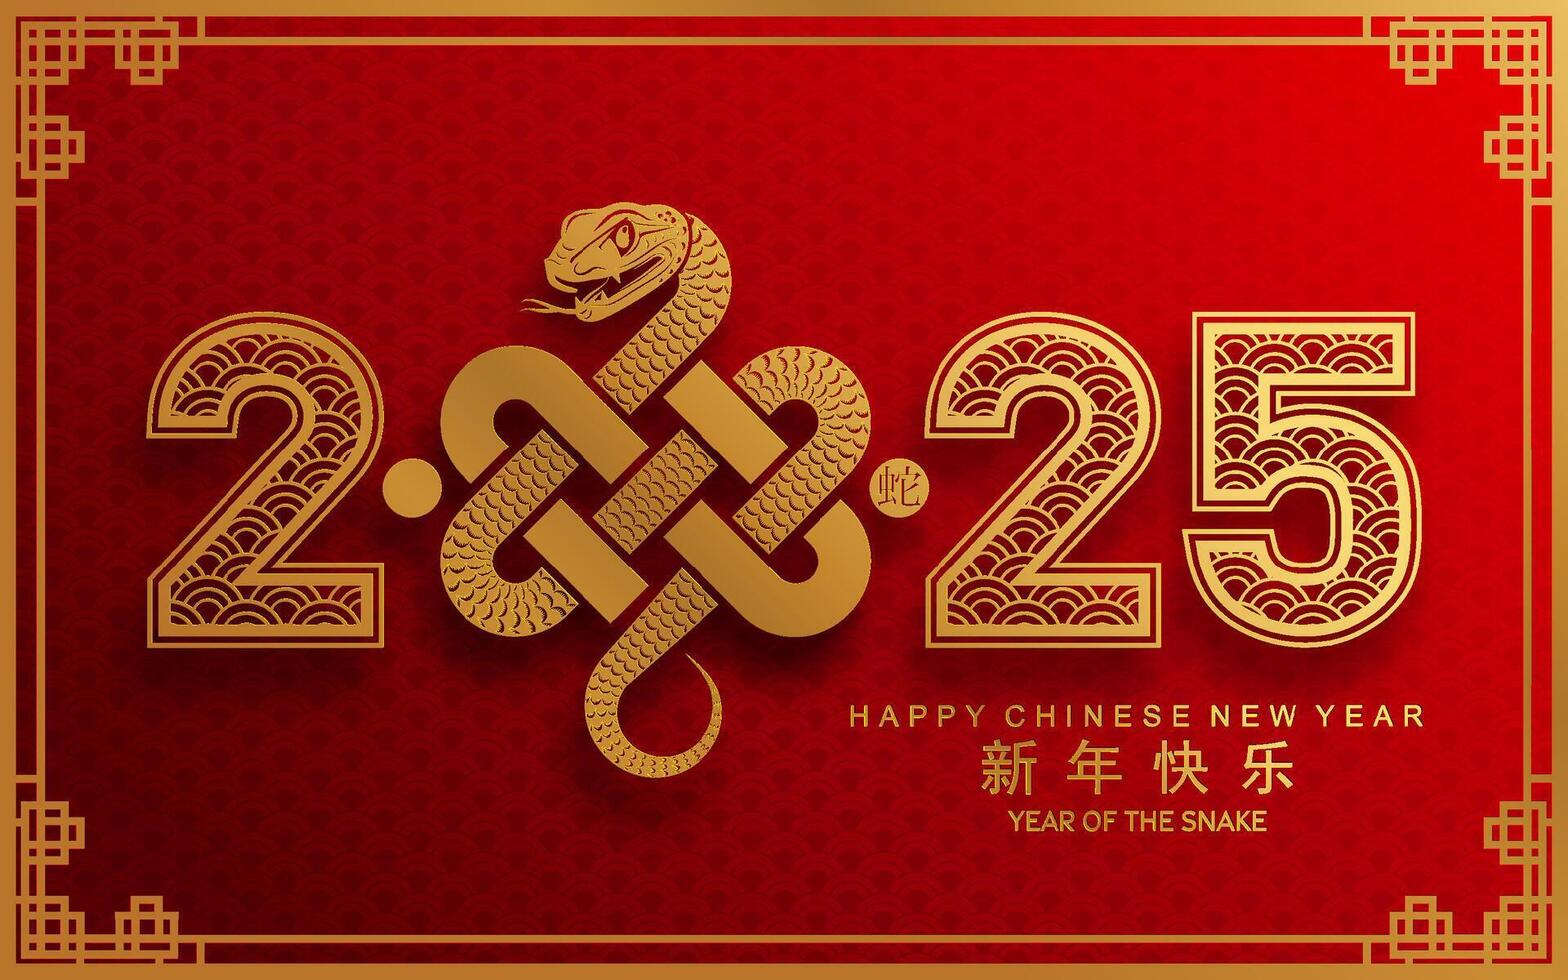 Happy chinese new year 2025 the snake zodiac sign with flower,lantern,asian elements snake logo red and gold paper cut style on color background. Happy new year 2025 year of the snake. vector